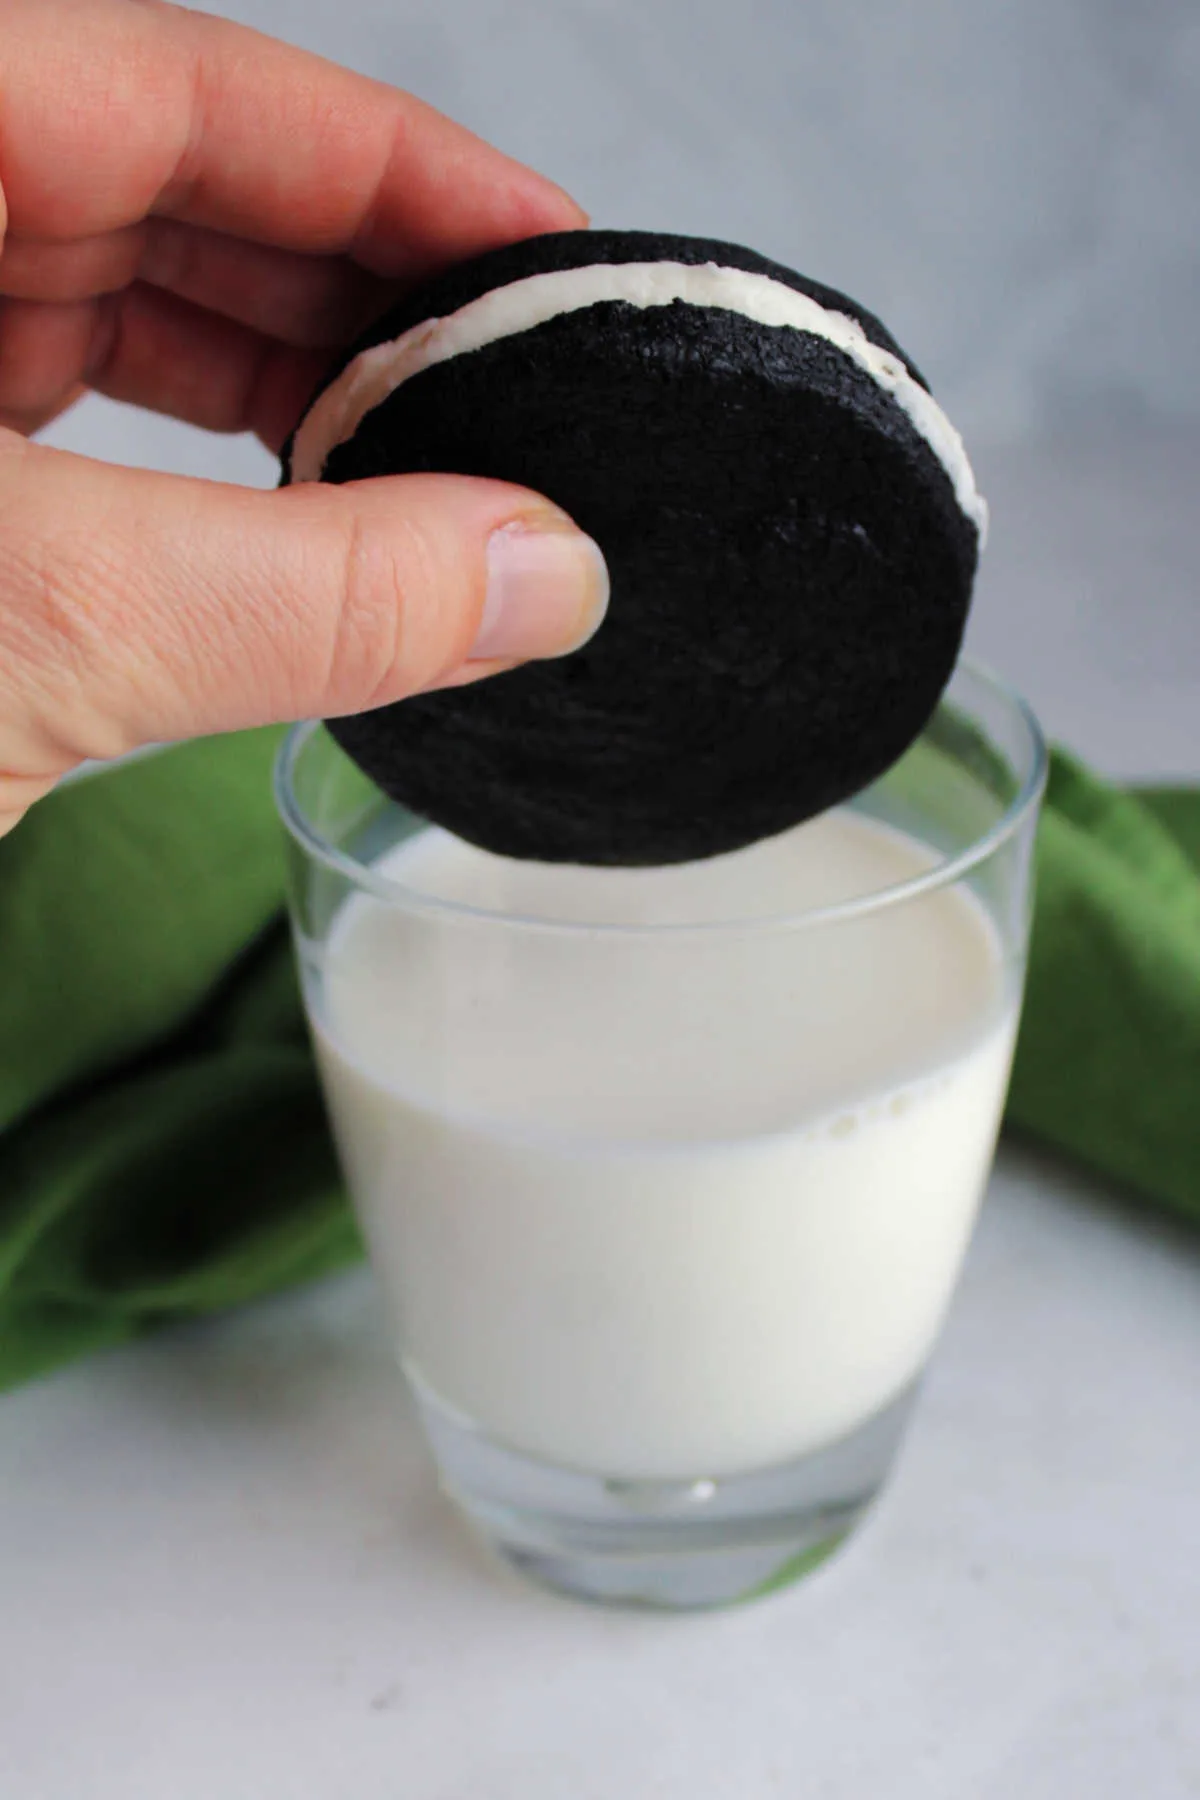 Hand getting ready to dunk a dark chocolate sandwich cookie with white cream filling into a glass of milk.